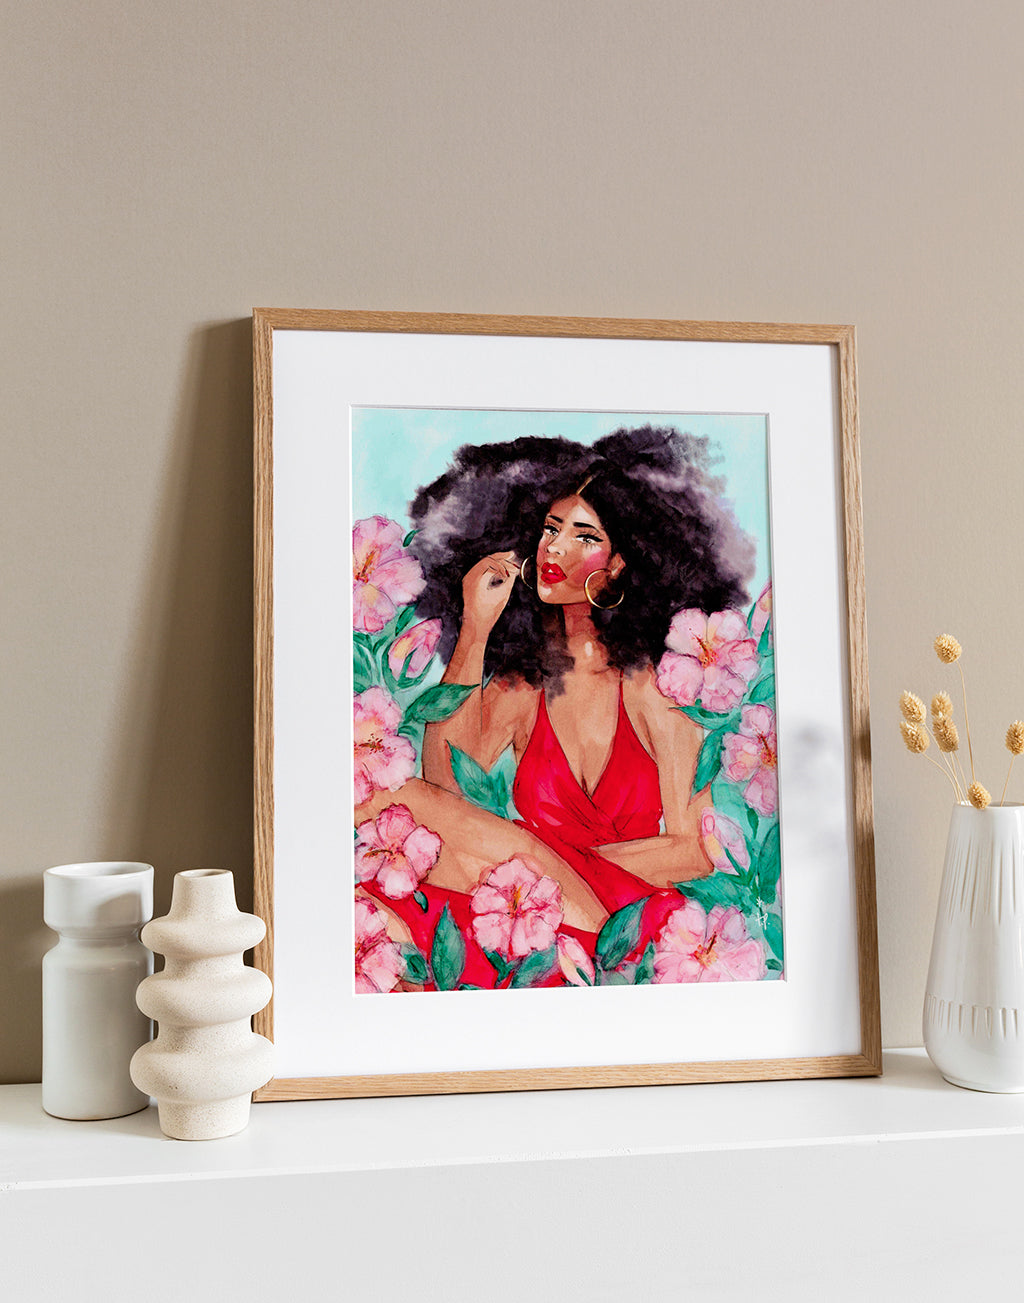 Illustration in a light frame of a beautiful black woman wearing a red dress and sitting among hibiscus flowers by Tatiana Poblah